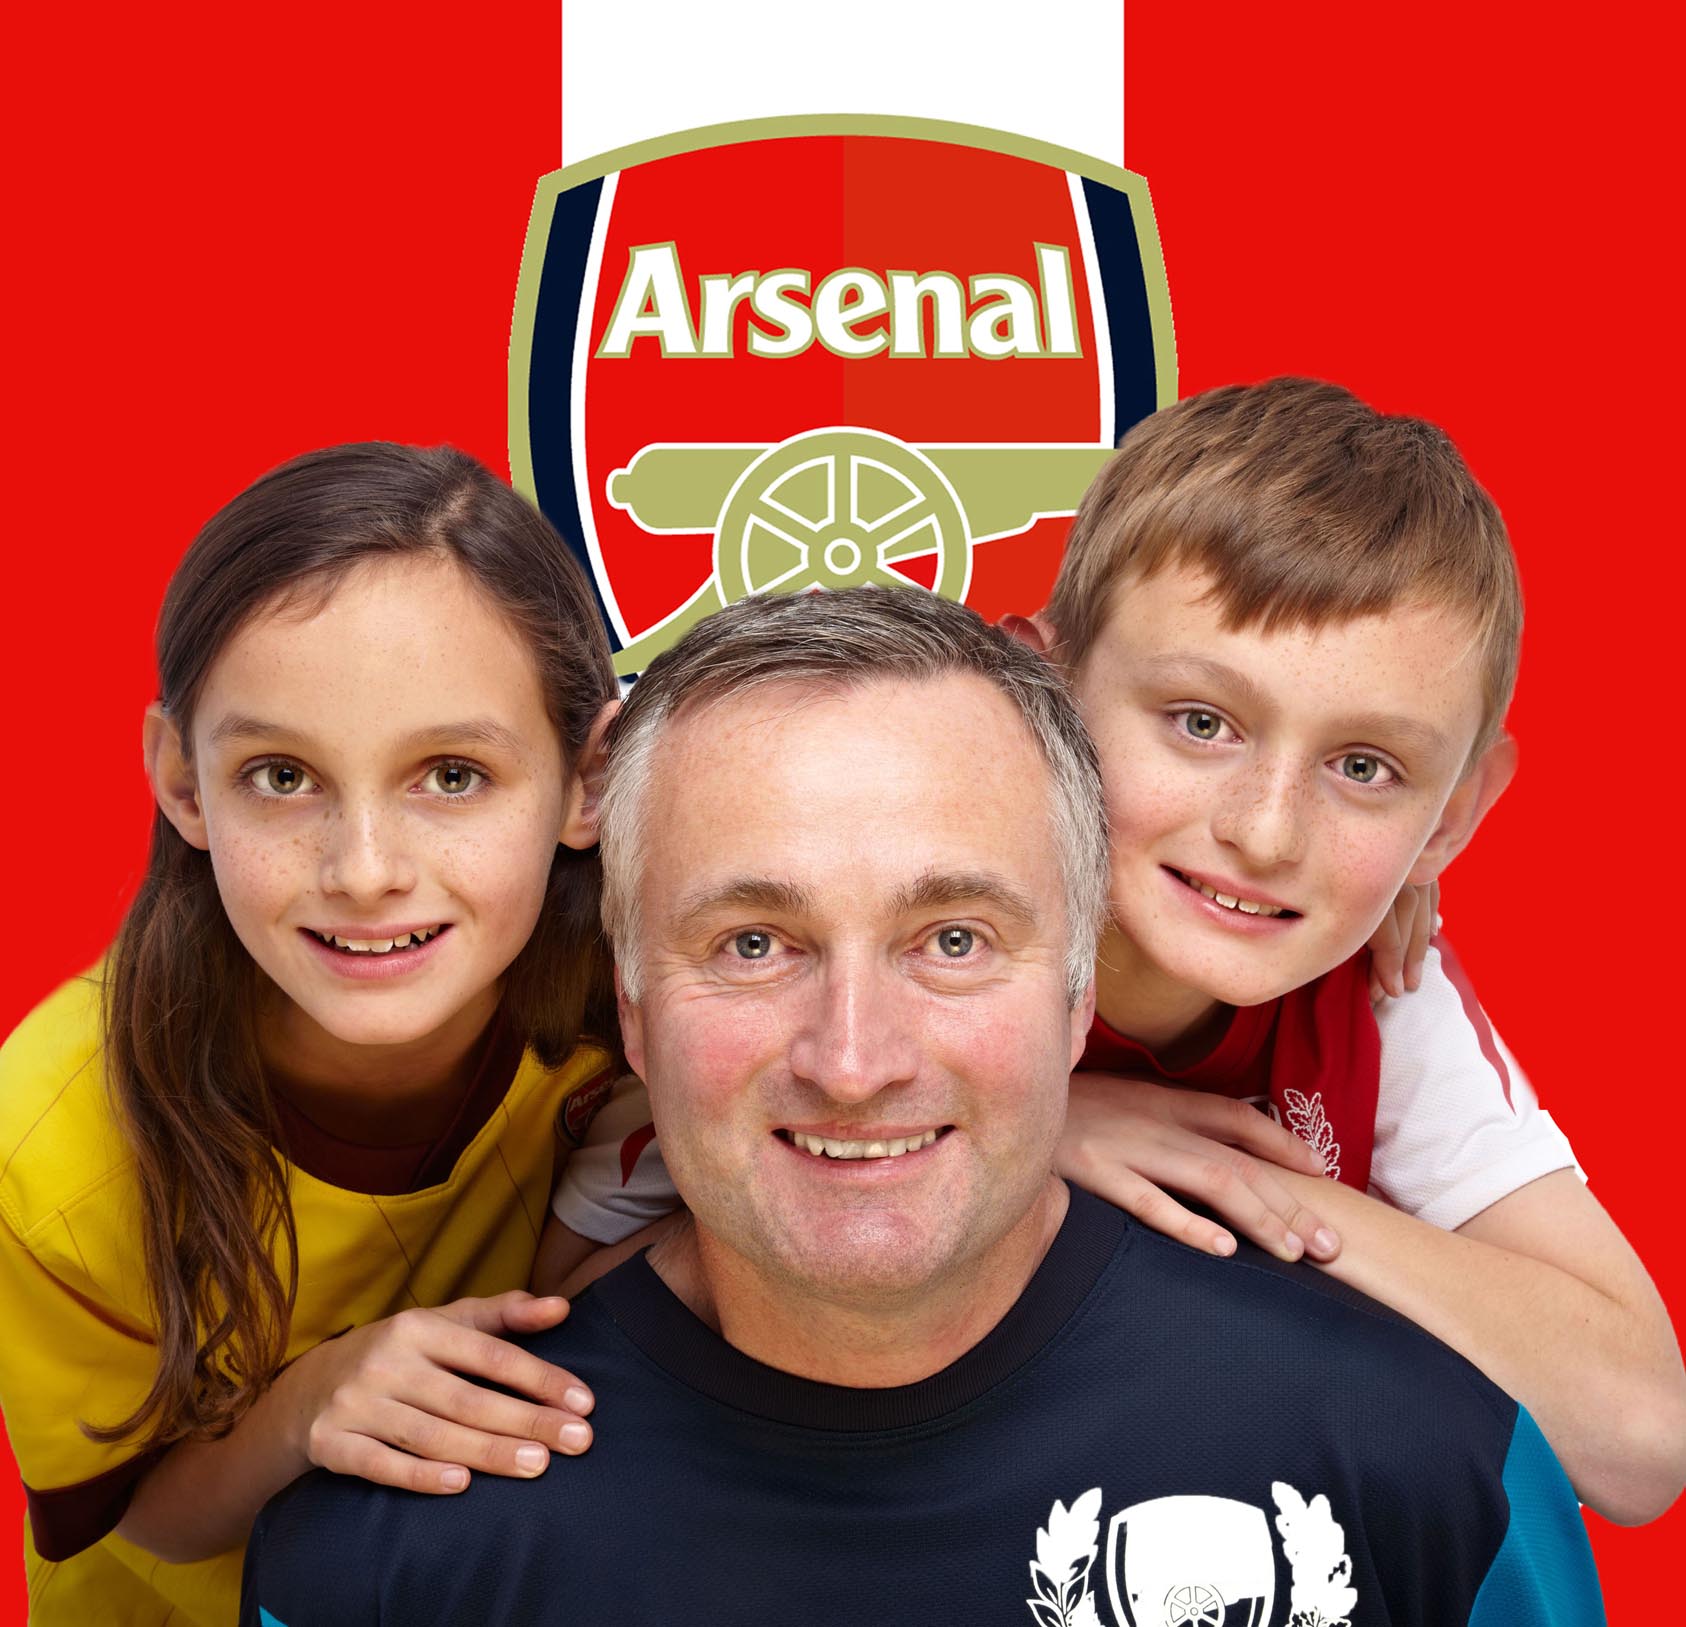 colin arsenal with kids.jpg